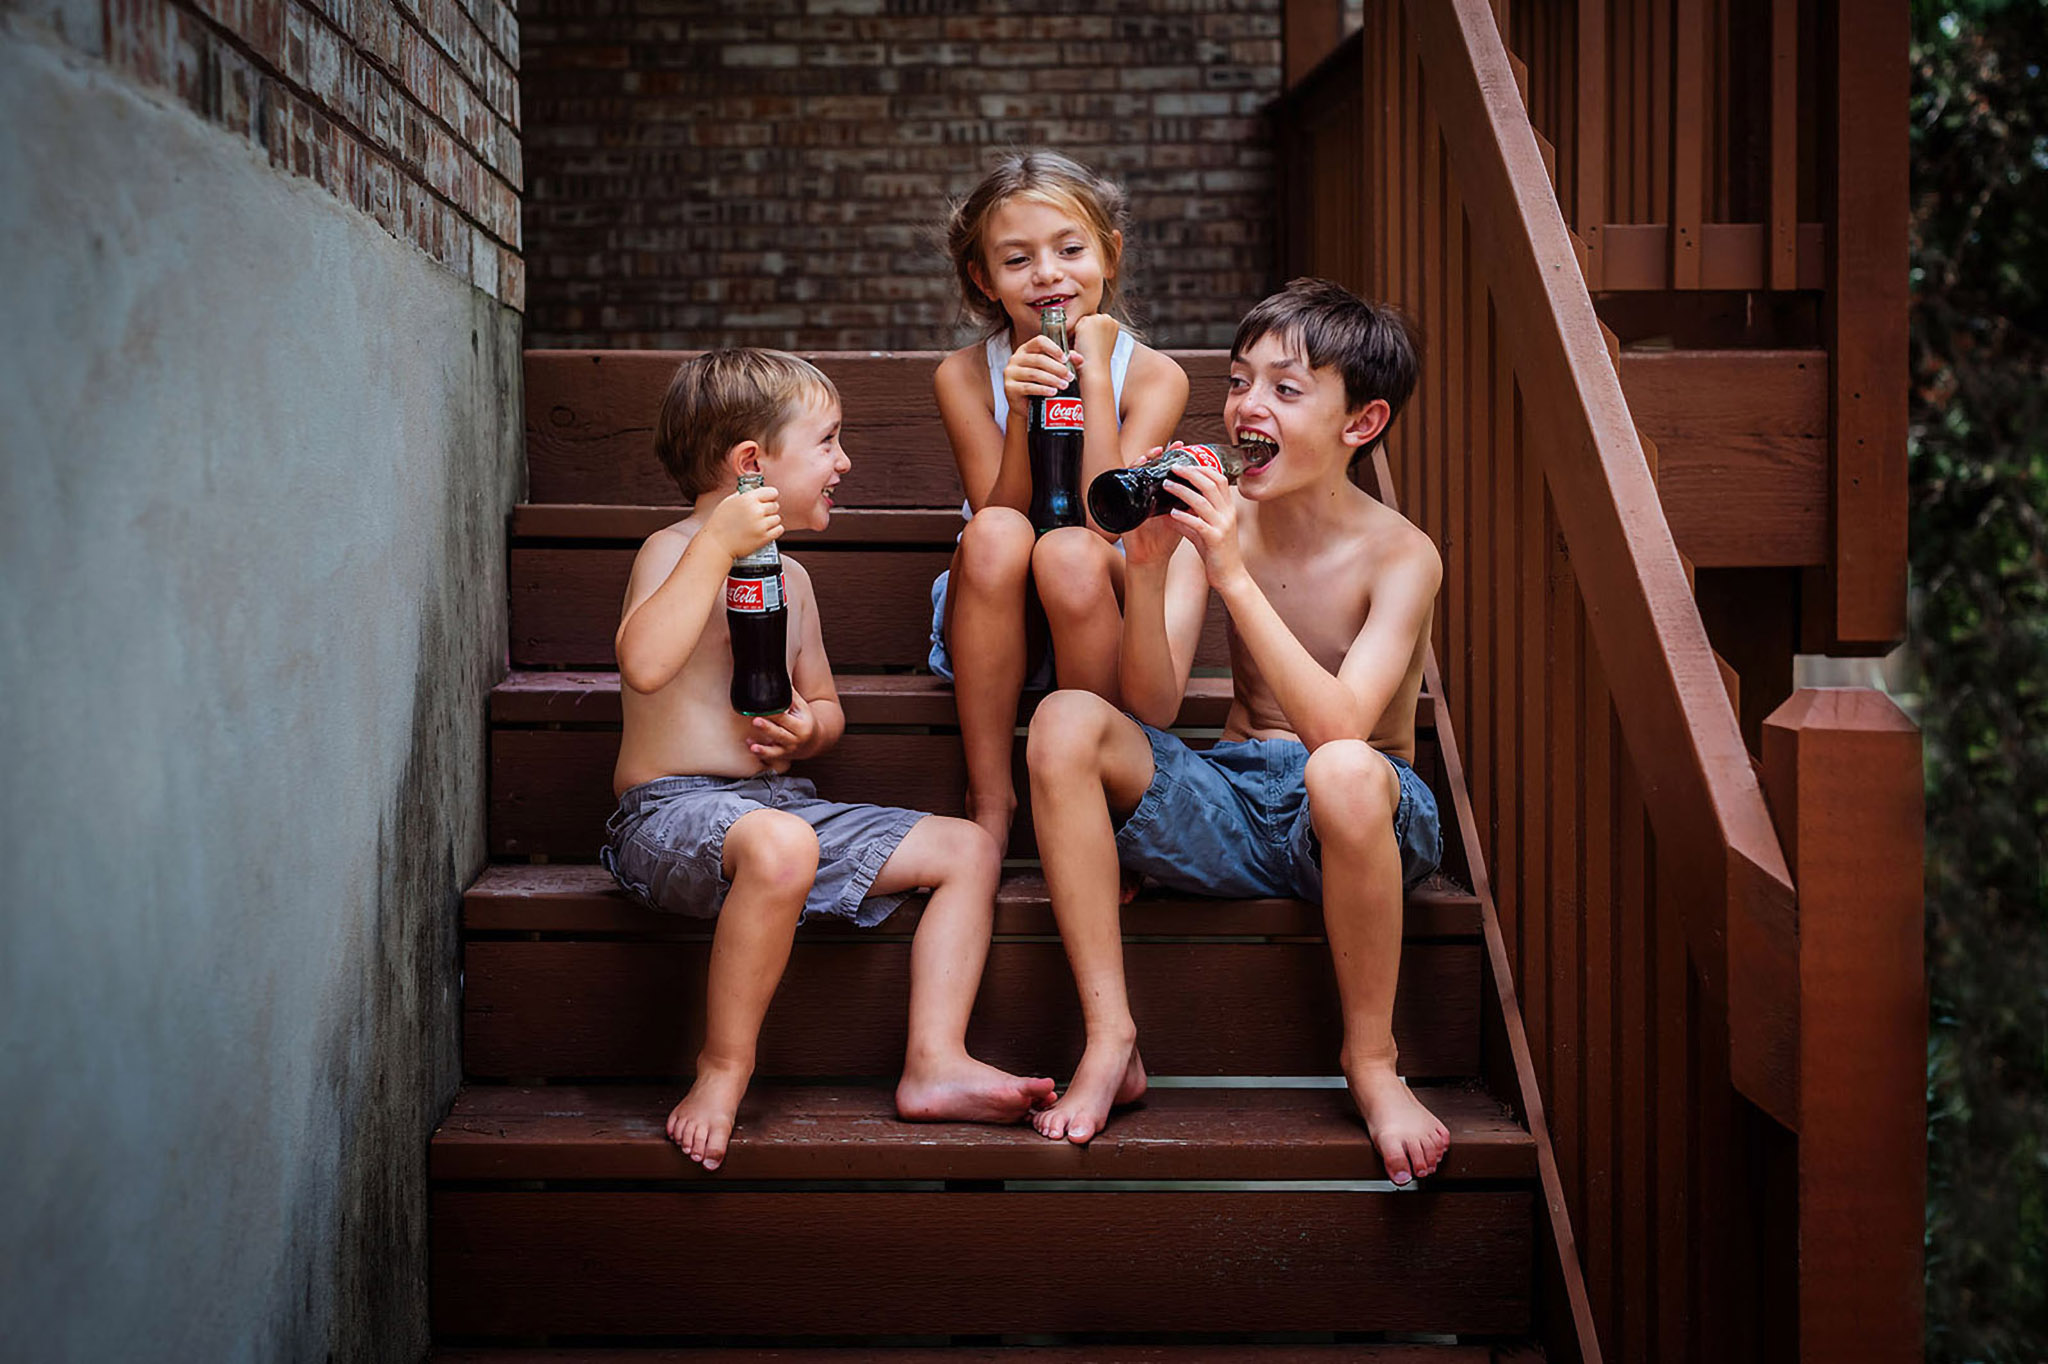 lindsayherkertphotography-6-coke-on-the-stairs